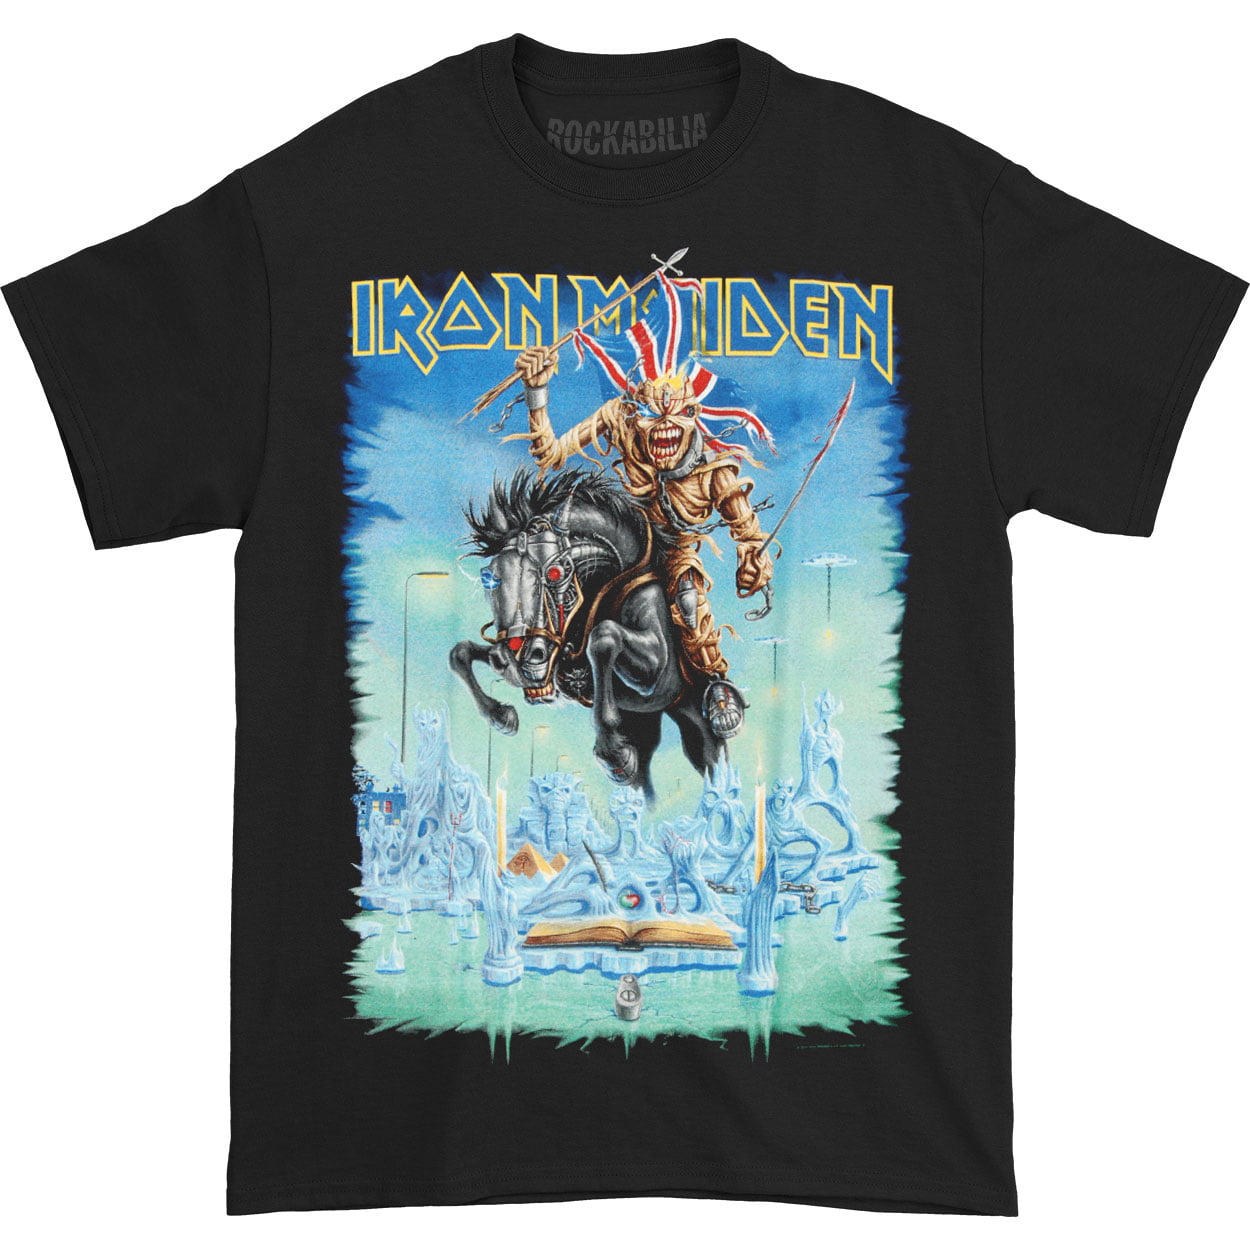 All Sizes IRON MAIDEN Nine Eddies T-SHIRT NEW OFFICIAL Killers Powerslave NOTB